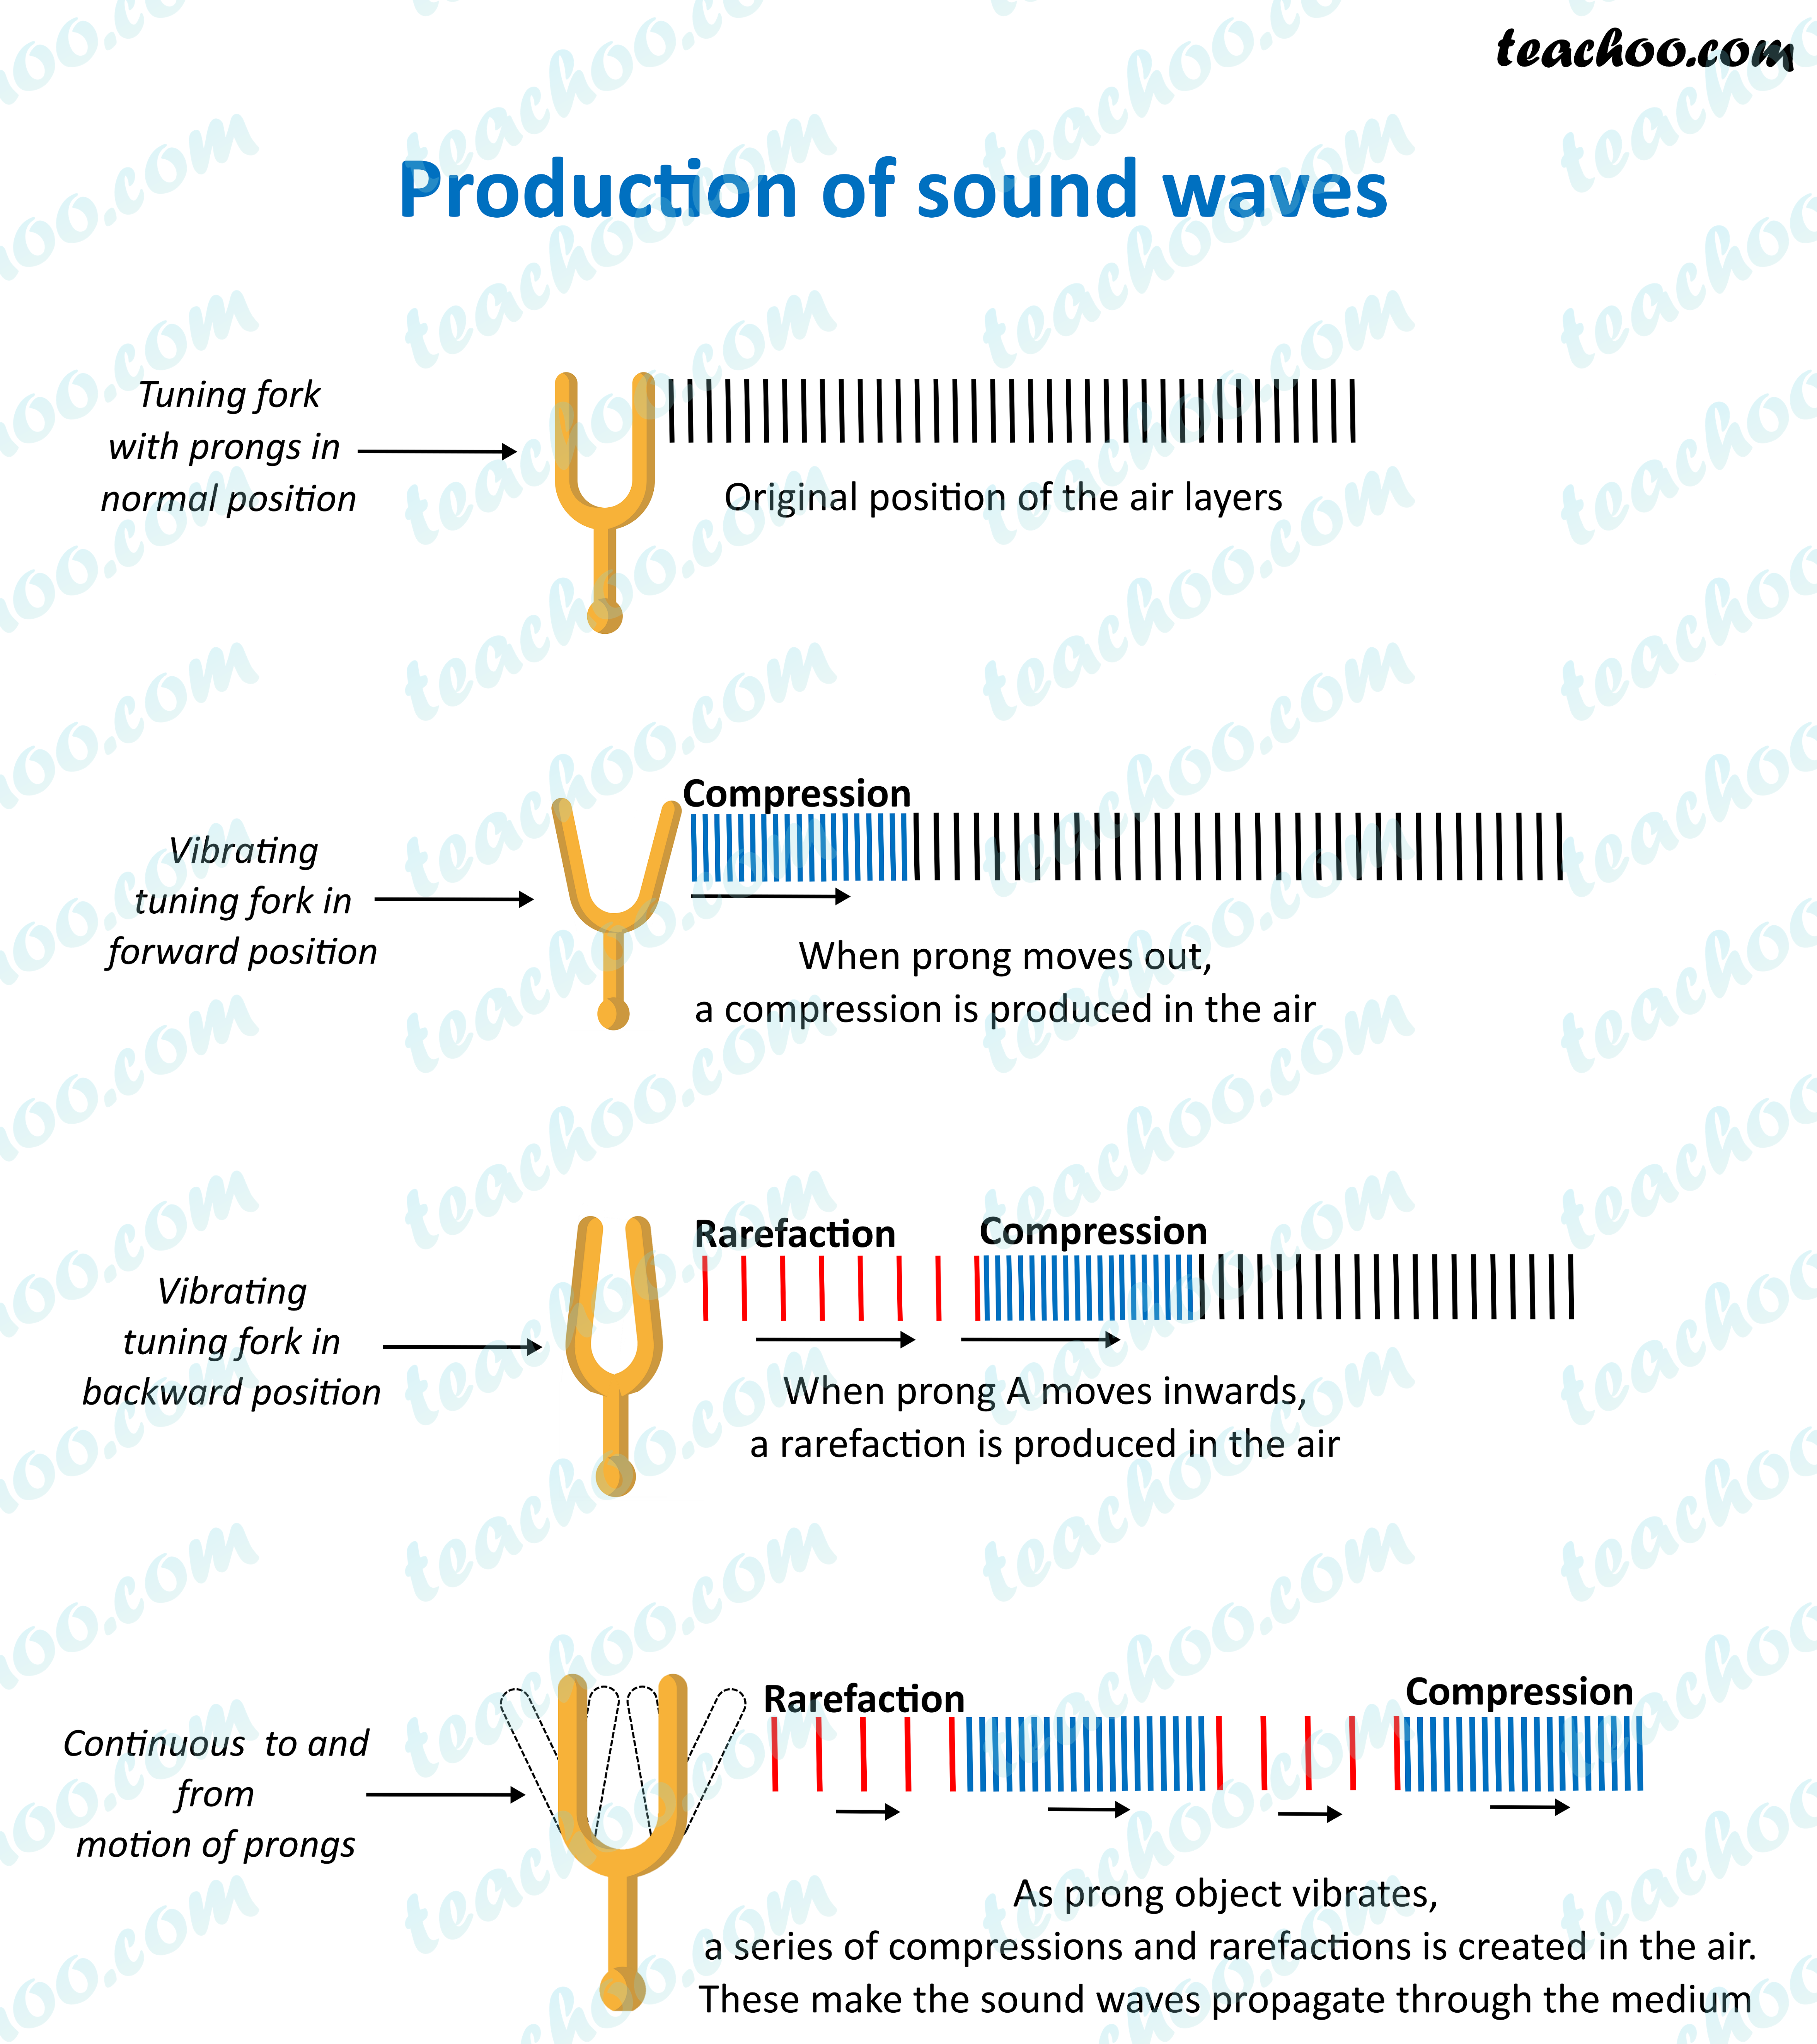 production-of-sound-waves-(2).png